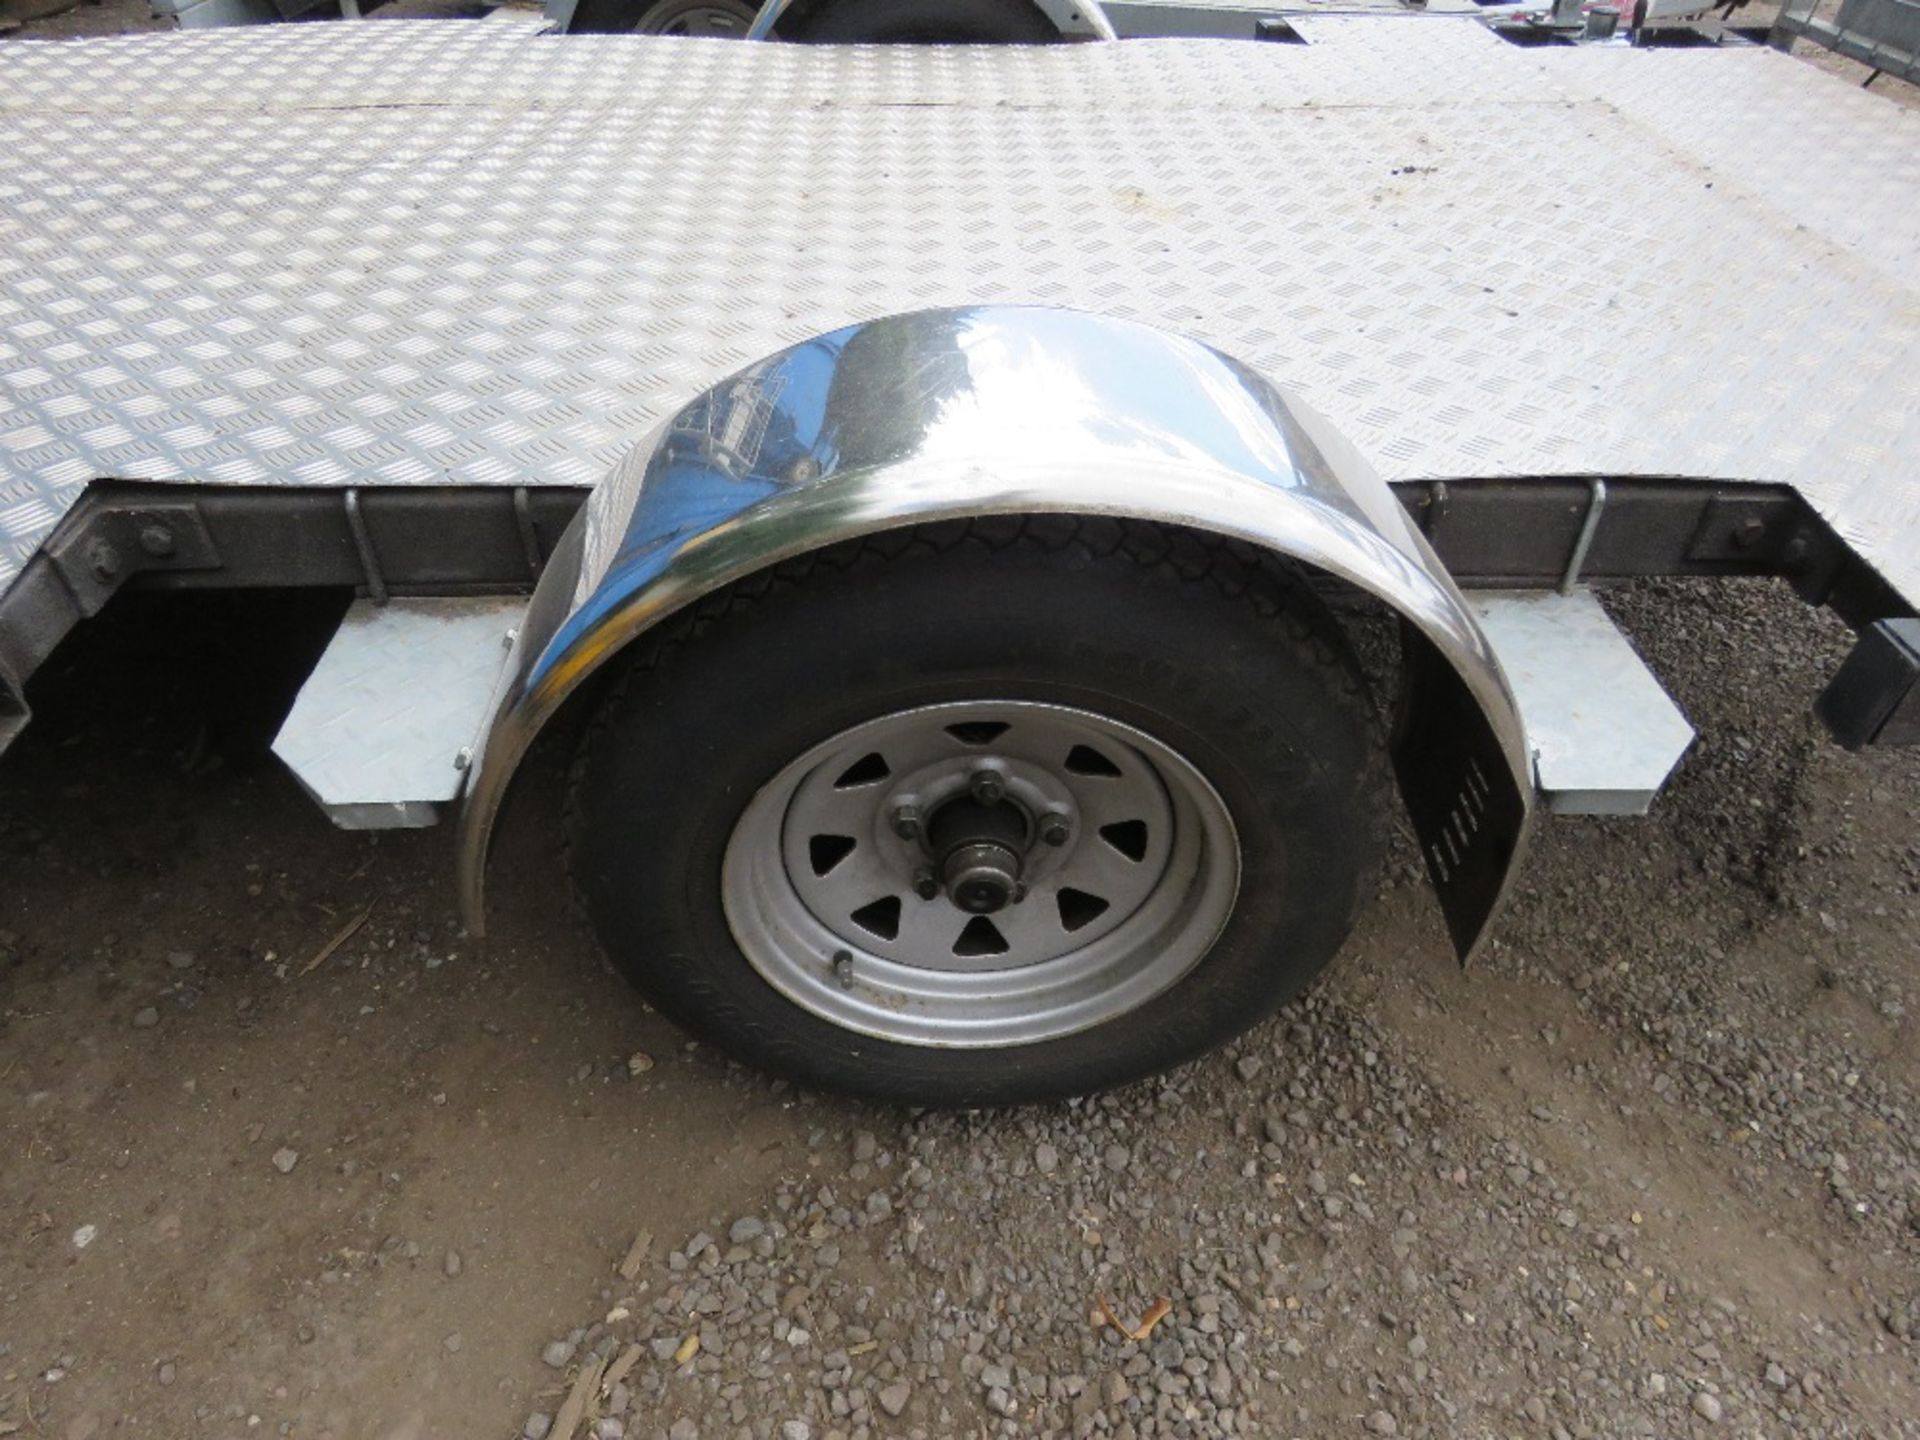 SINGLE AXLED QUAD BIKE / FLAT TRAILER 1.8M WIDE X 2.4M LENGTH BED APPROX. SOURCED FROM LIQUIDATION. - Image 6 of 6